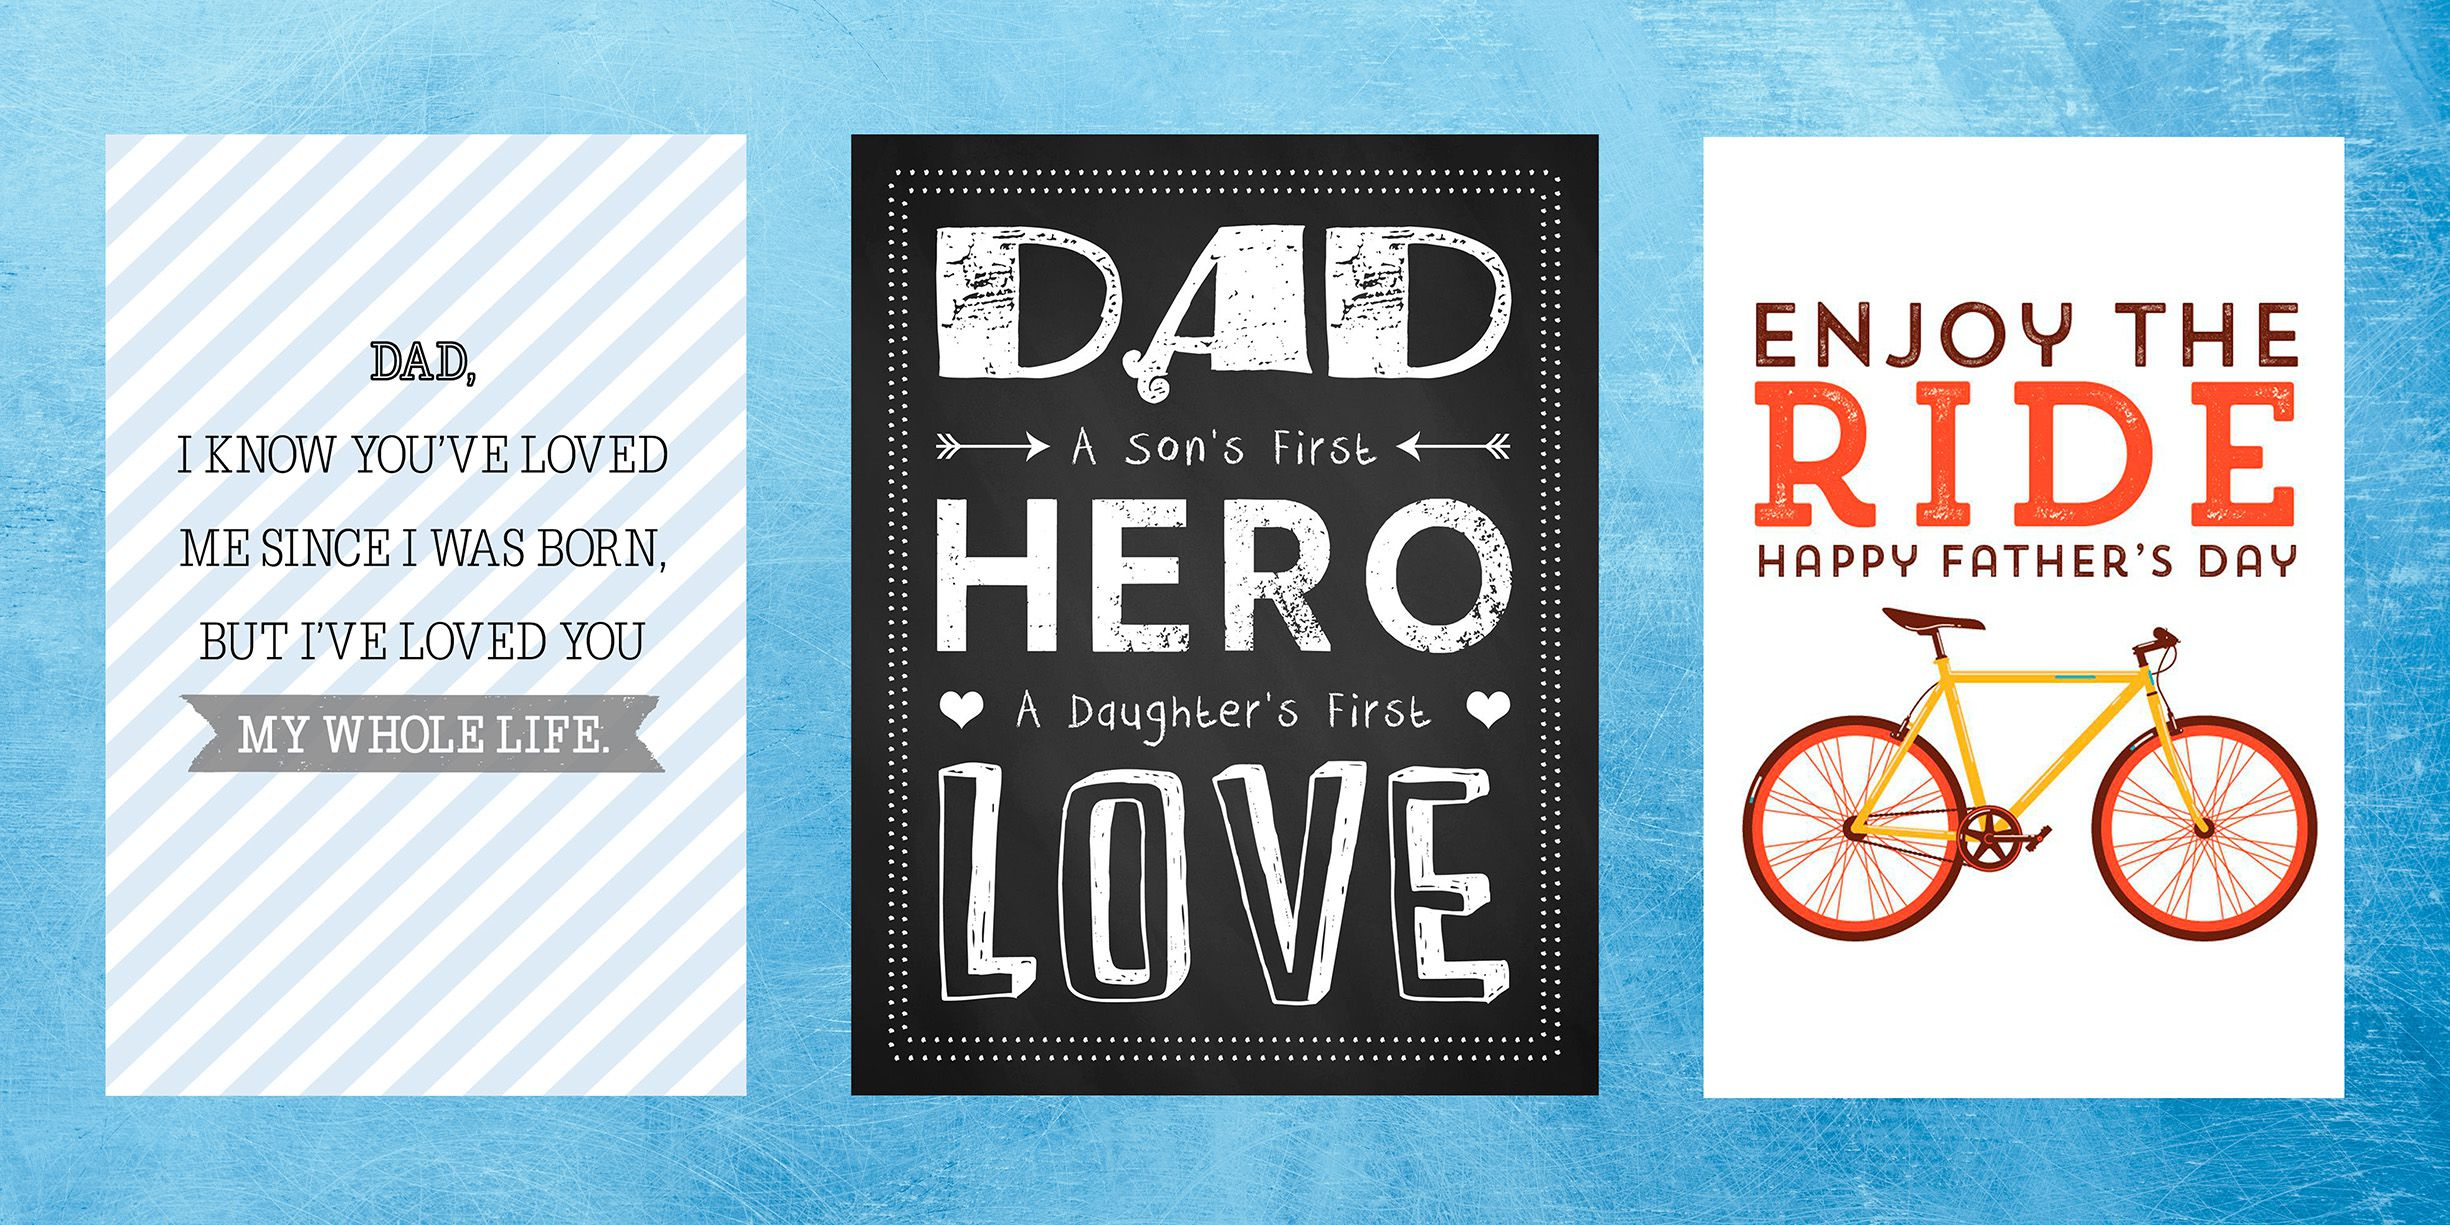 15 Free Printable Father&amp;#039;s Day Cards - Cute Online Father&amp;#039;s Day - Free Printable Father&amp;amp;#039;s Day Card From Wife To Husband